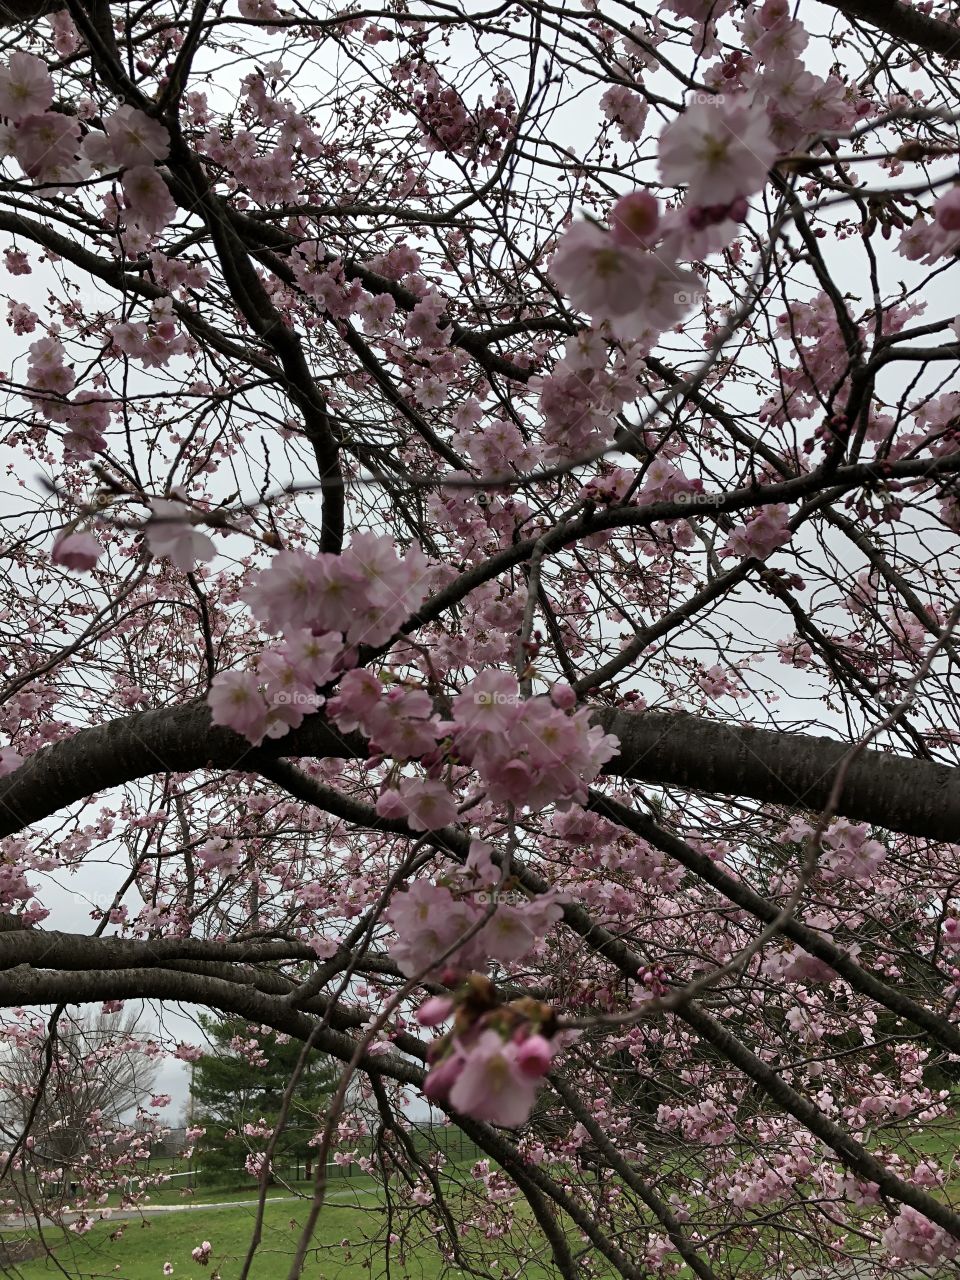 Some blossoming spring flowers on a rainy day in April. Picture taken at Colonial Park in New Jersey. 